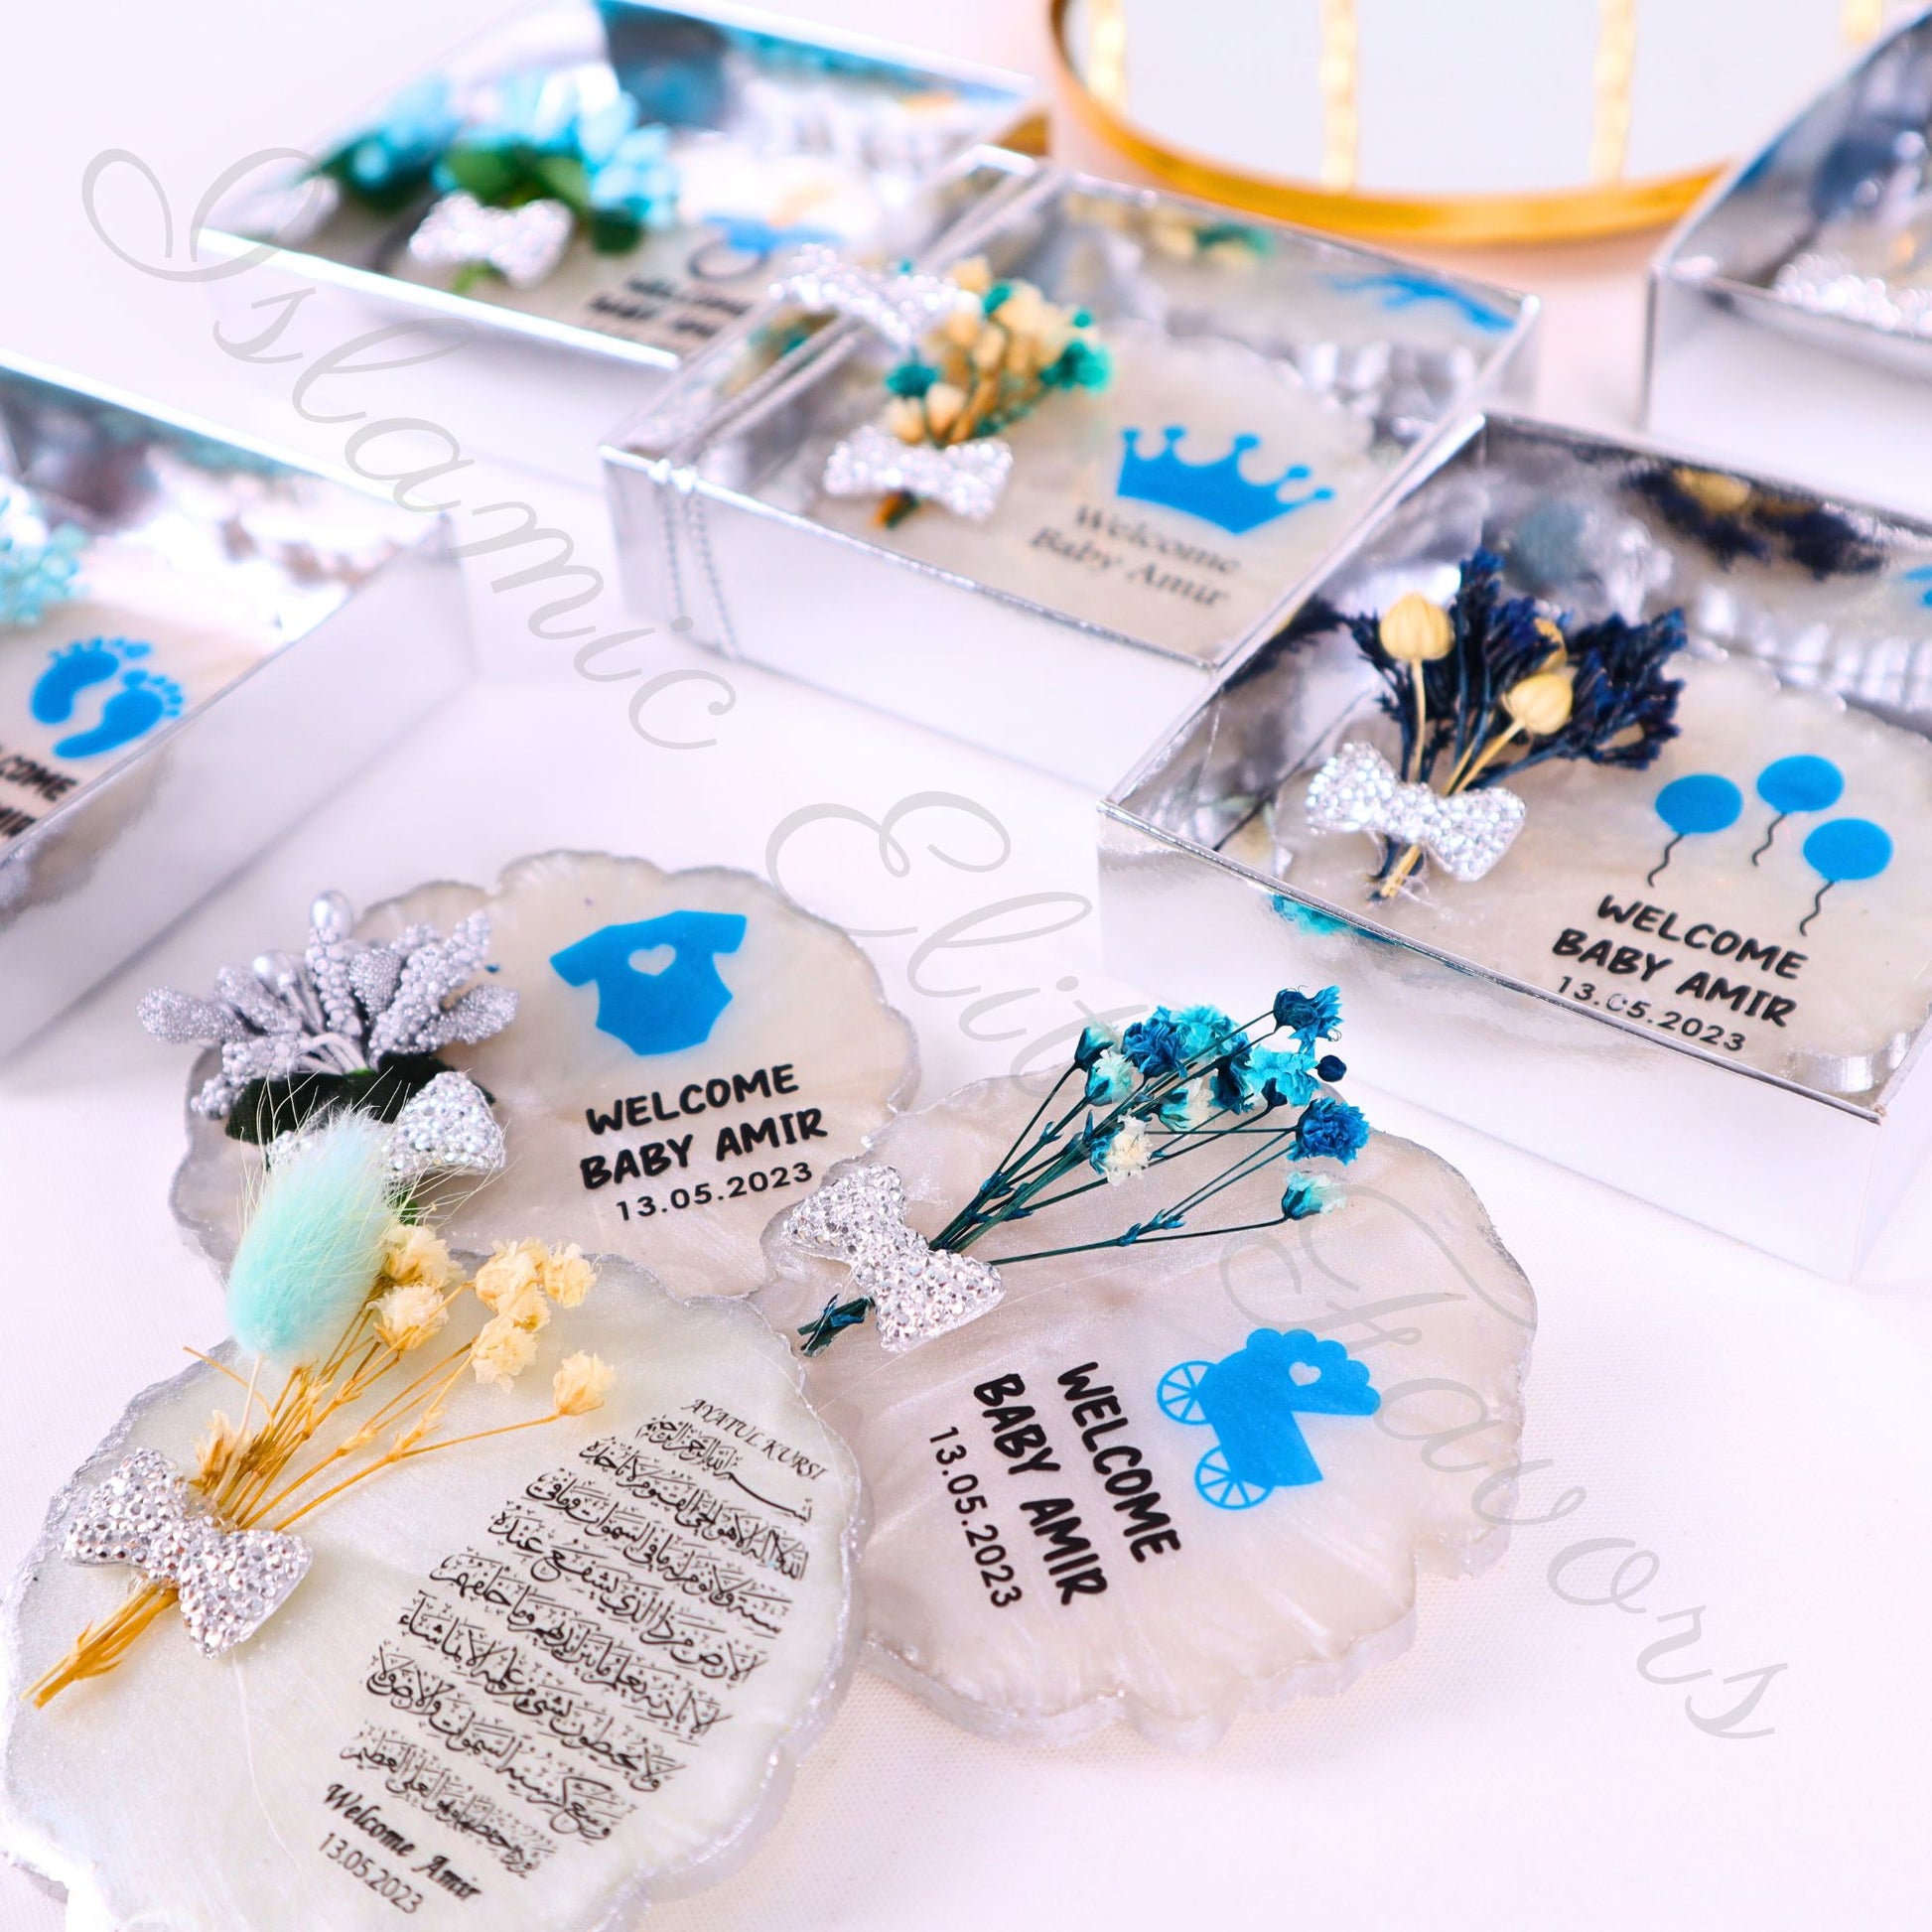 Personalized Baby Shower Favors Epoxy Magnet for Baby Boy Silver Theme - Islamic Elite Favors is a handmade gift shop offering a wide variety of unique and personalized gifts for all occasions. Whether you're looking for the perfect Ramadan, Eid, Hajj, wedding gift or something special for a birthday, baby shower or anniversary, we have something for everyone. High quality, made with love.